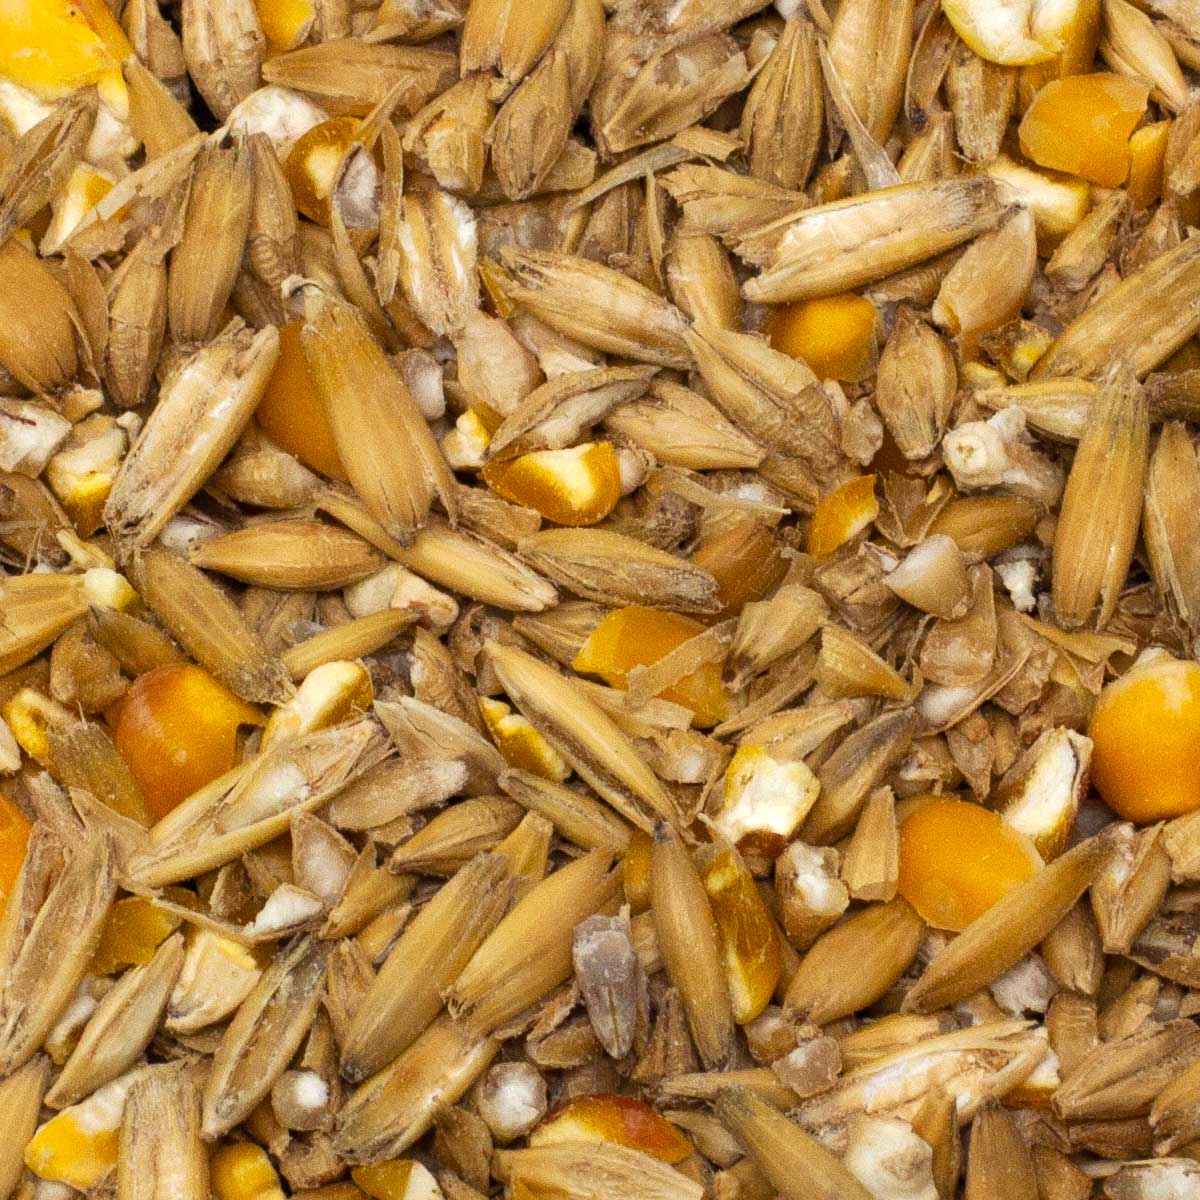 Leimüller cereal mix for horses